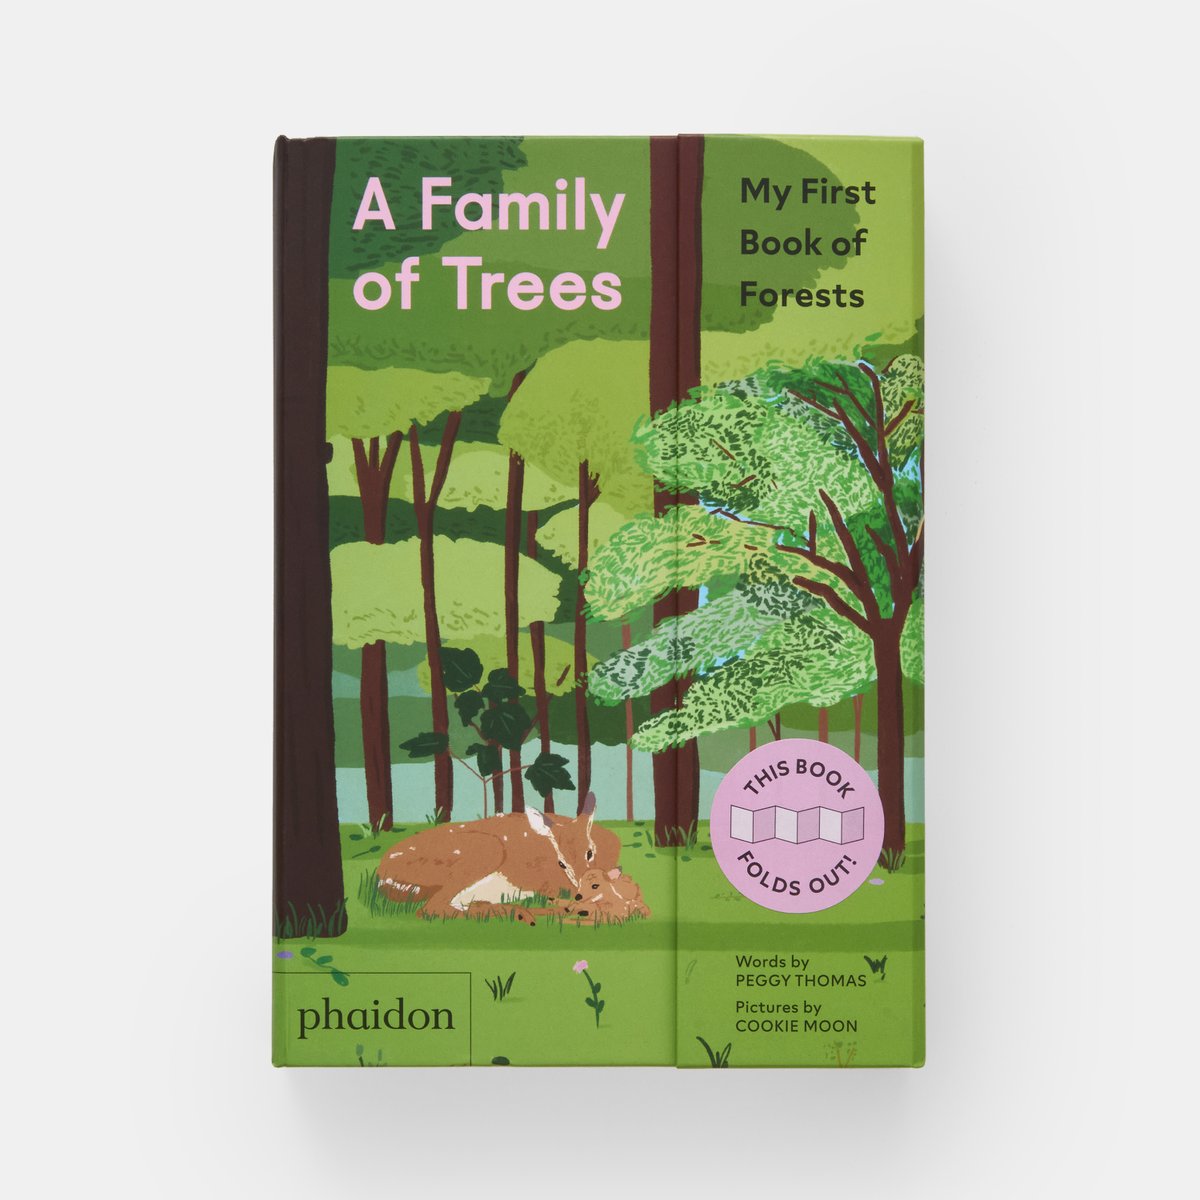 Happy #ArborDay from 'Family of Trees' by Peggy Thomas 🌳 📗Tap to pre-order: eu1.hubs.ly/H08K-Yr0